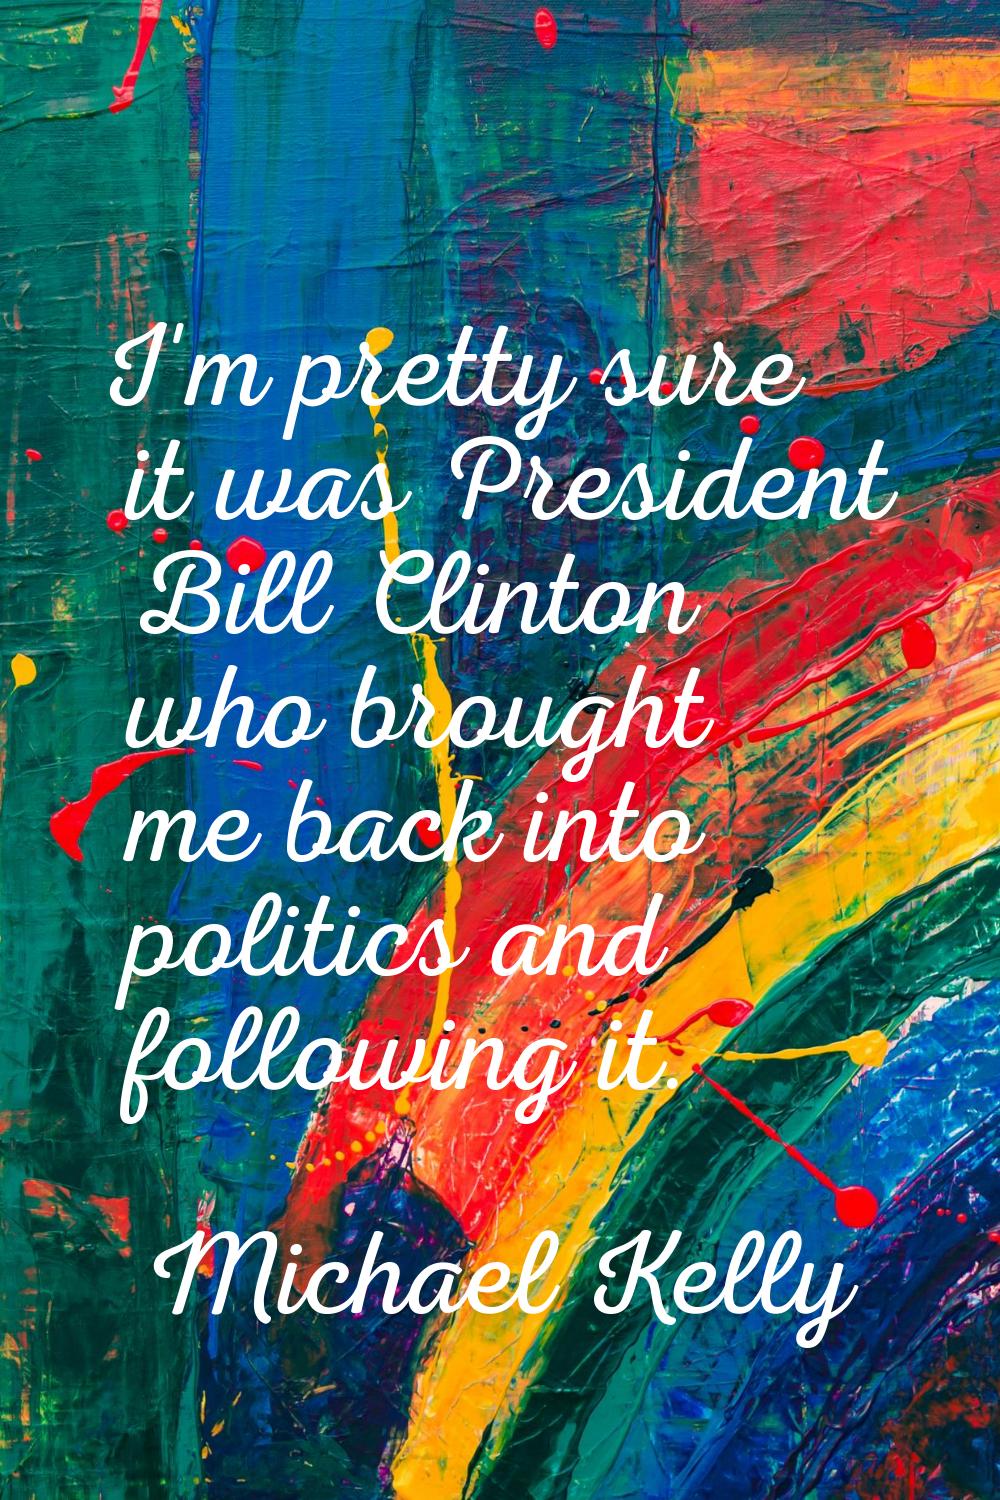 I'm pretty sure it was President Bill Clinton who brought me back into politics and following it.